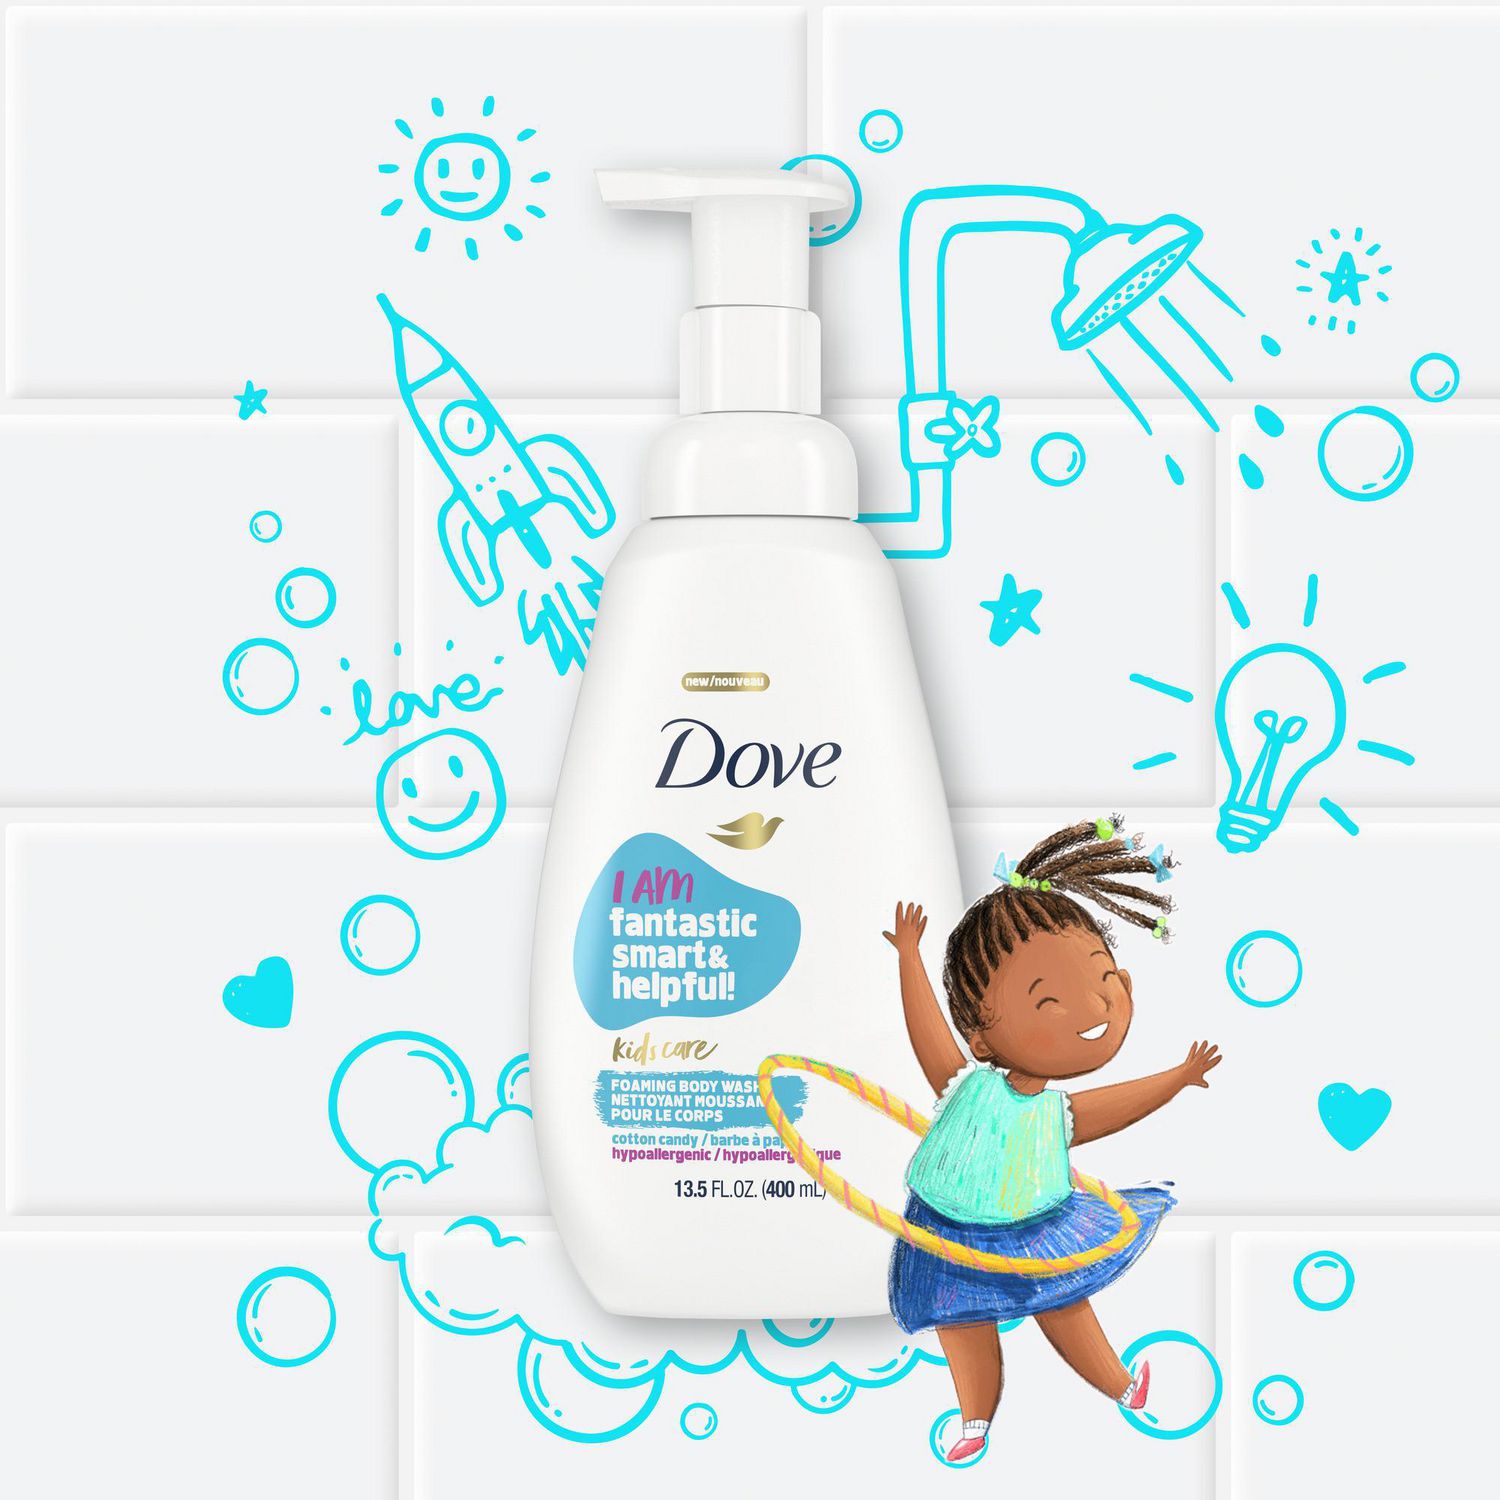 New Dove kids care products are branded with positive affirmations